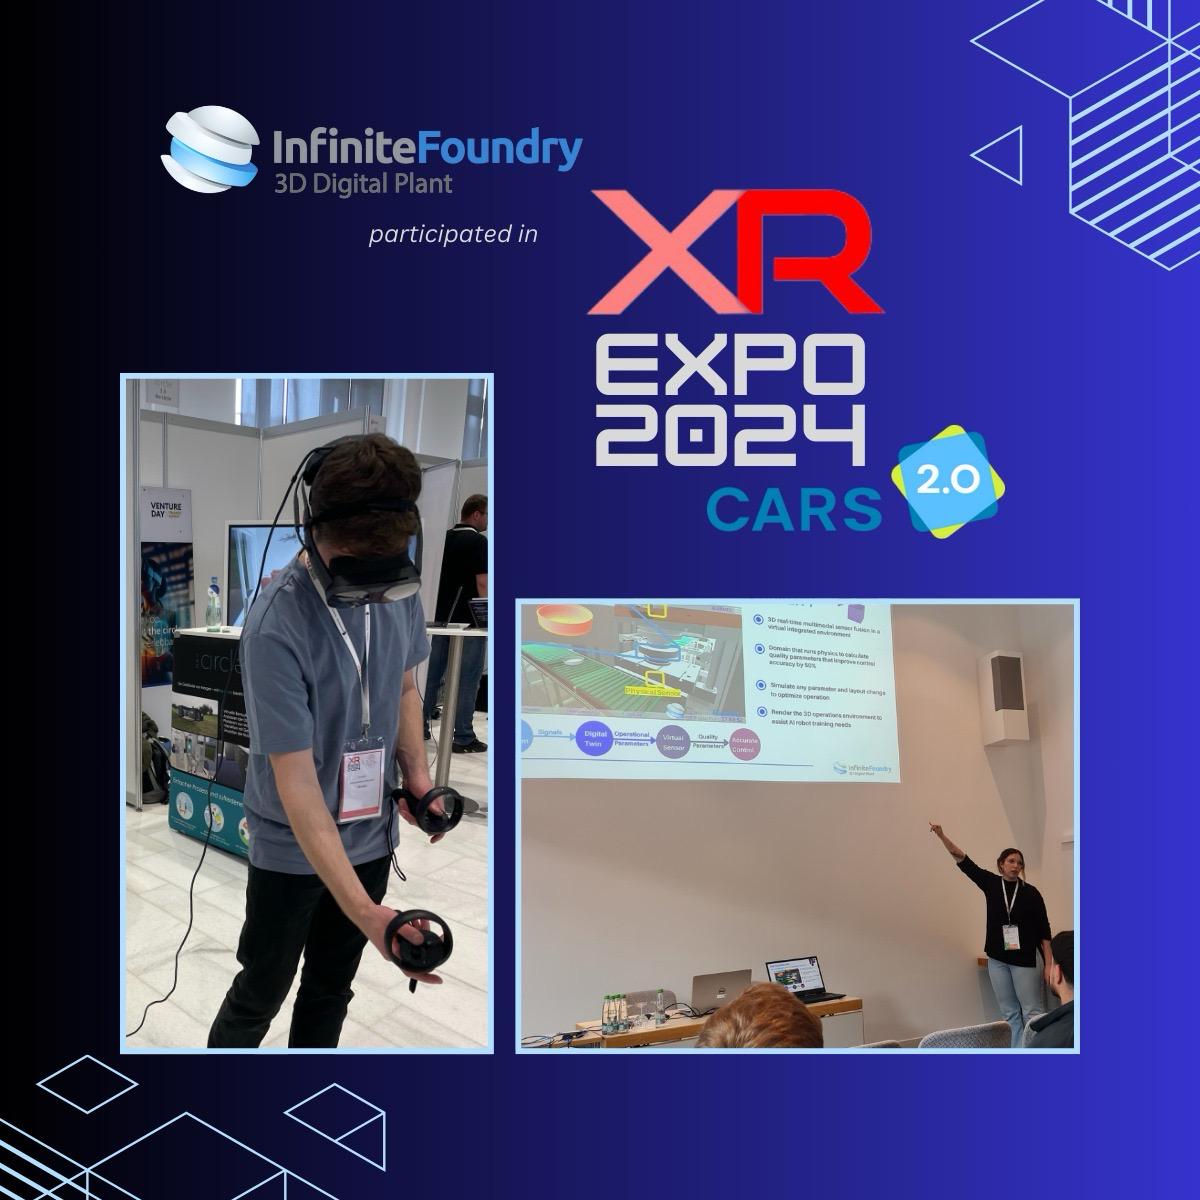 🚀 Exciting News from XR Expo 2024! 🌟 We were thrilled to be part of this year's XR Expo in Stuttgart alongside CARS 2.0, showcasing our cutting-edge VR Training solutions and innovative technology. 🎮✨

#XR #VirtualReality #AugmentedReality #Innovation  #VRTraining #XRexpo2024